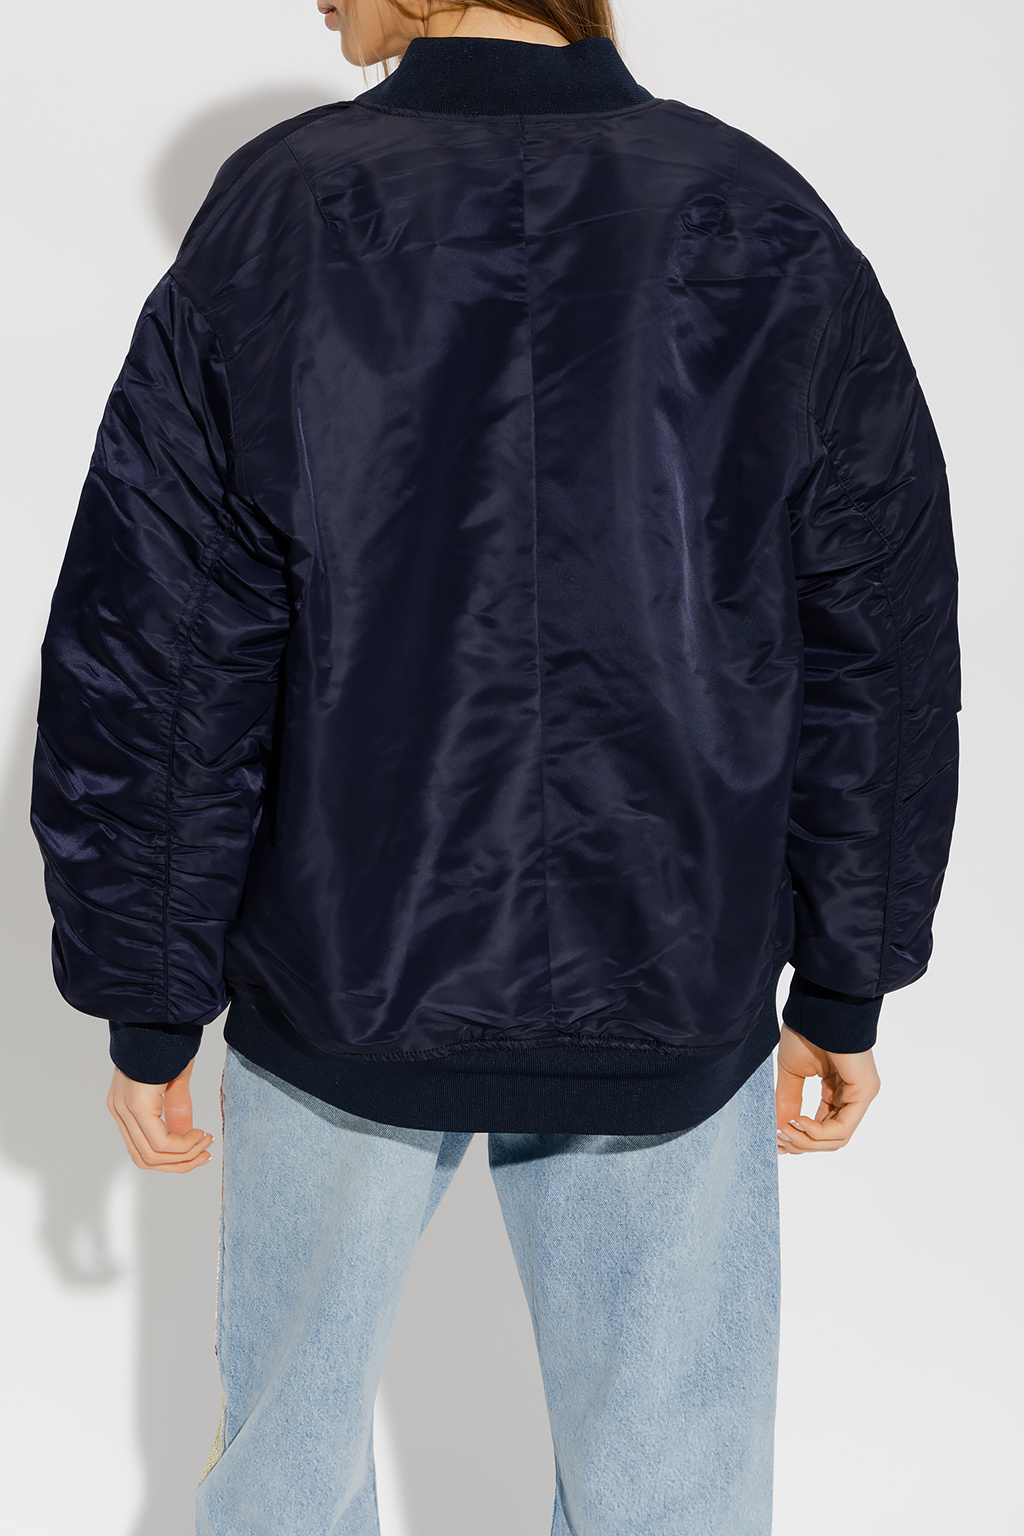 Levi's Bomber Inspire jacket ‘Performance’ collection